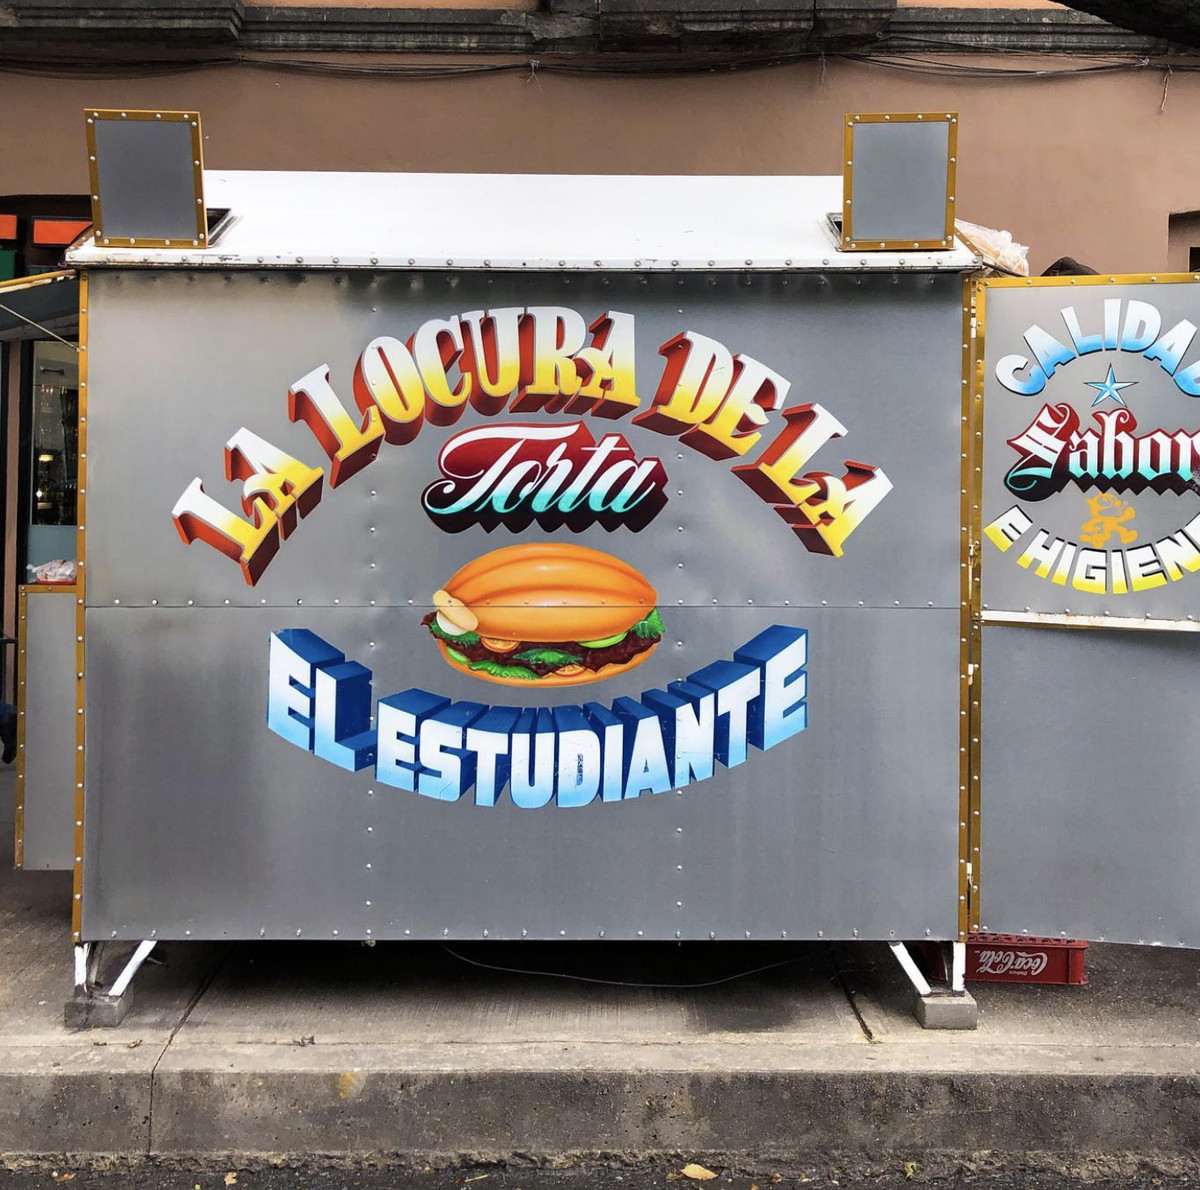 Before and after photos of two food stands. One advertises La Locura de la Torta El Estudiante in bold lettering with an illustration of a torta. The other advertises Yovas Jugos y Algo Mas with fruit illustrations. Both are replaced with a small sign for the Cuauhtémoc district in the later photos.